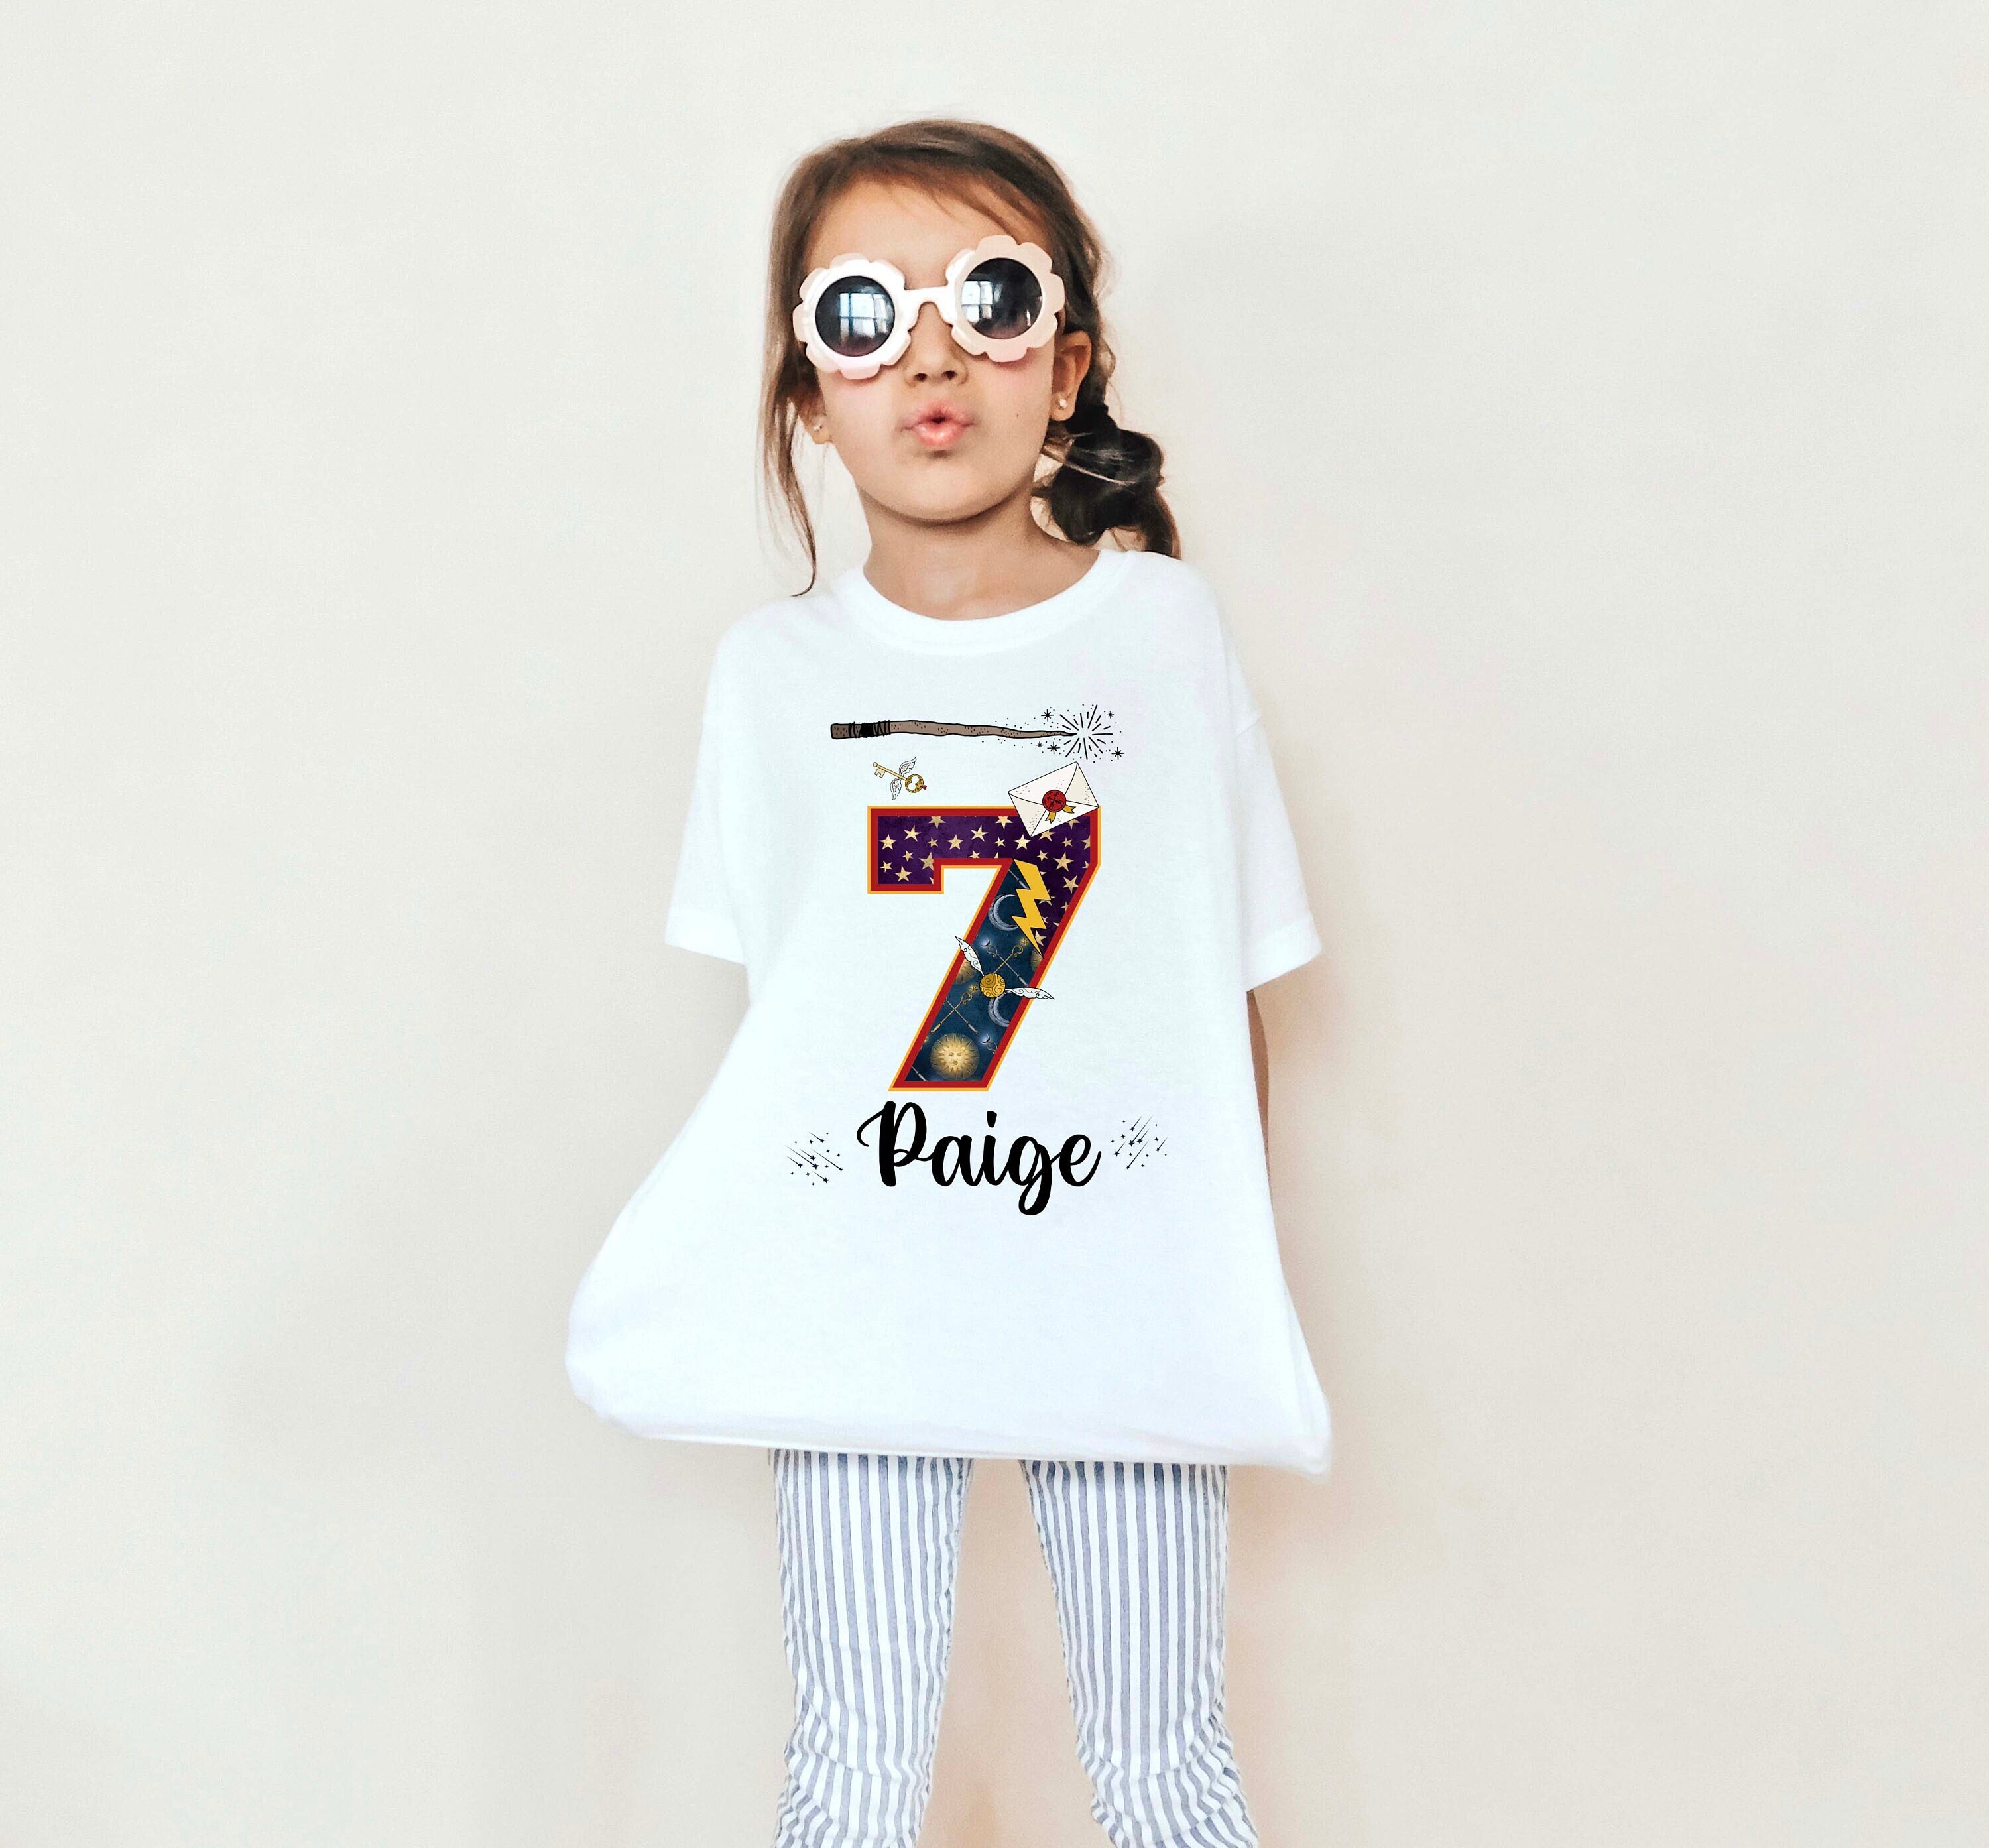 Free Shipping Over 15 With Exclusive Discounts Vintage 2016 Limited Edition 7th Birthday T 7